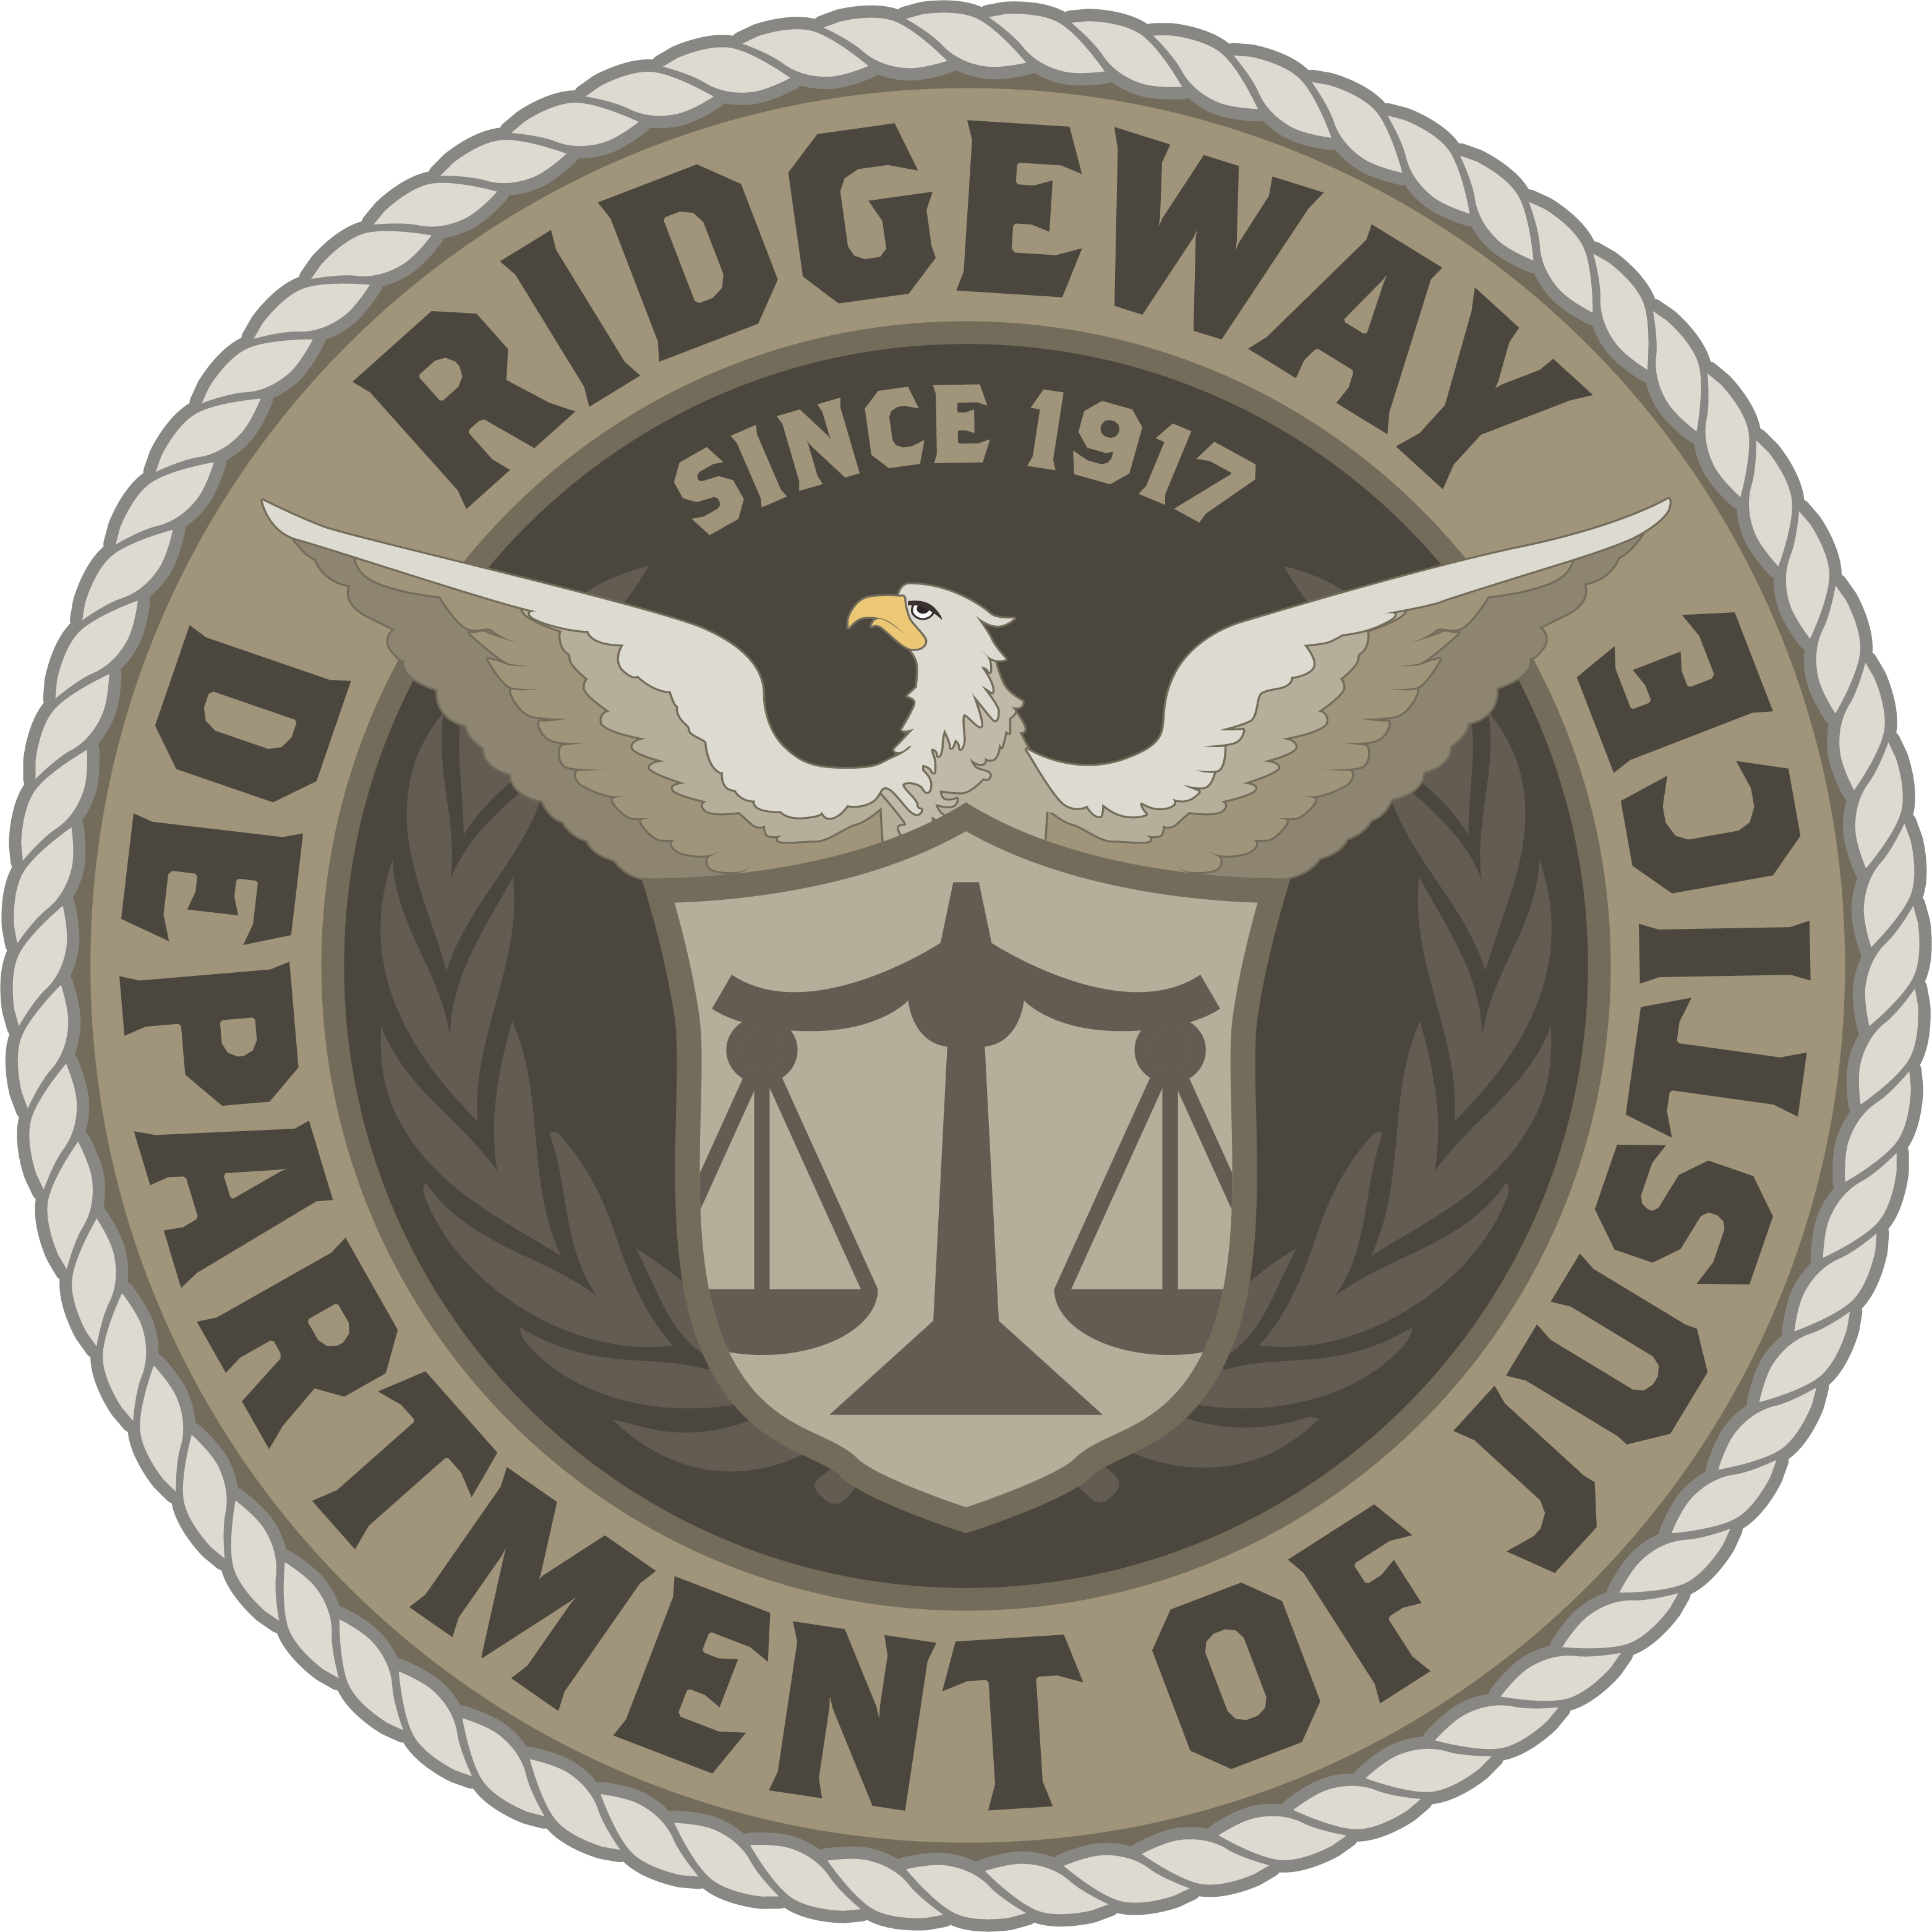 department of justice seal